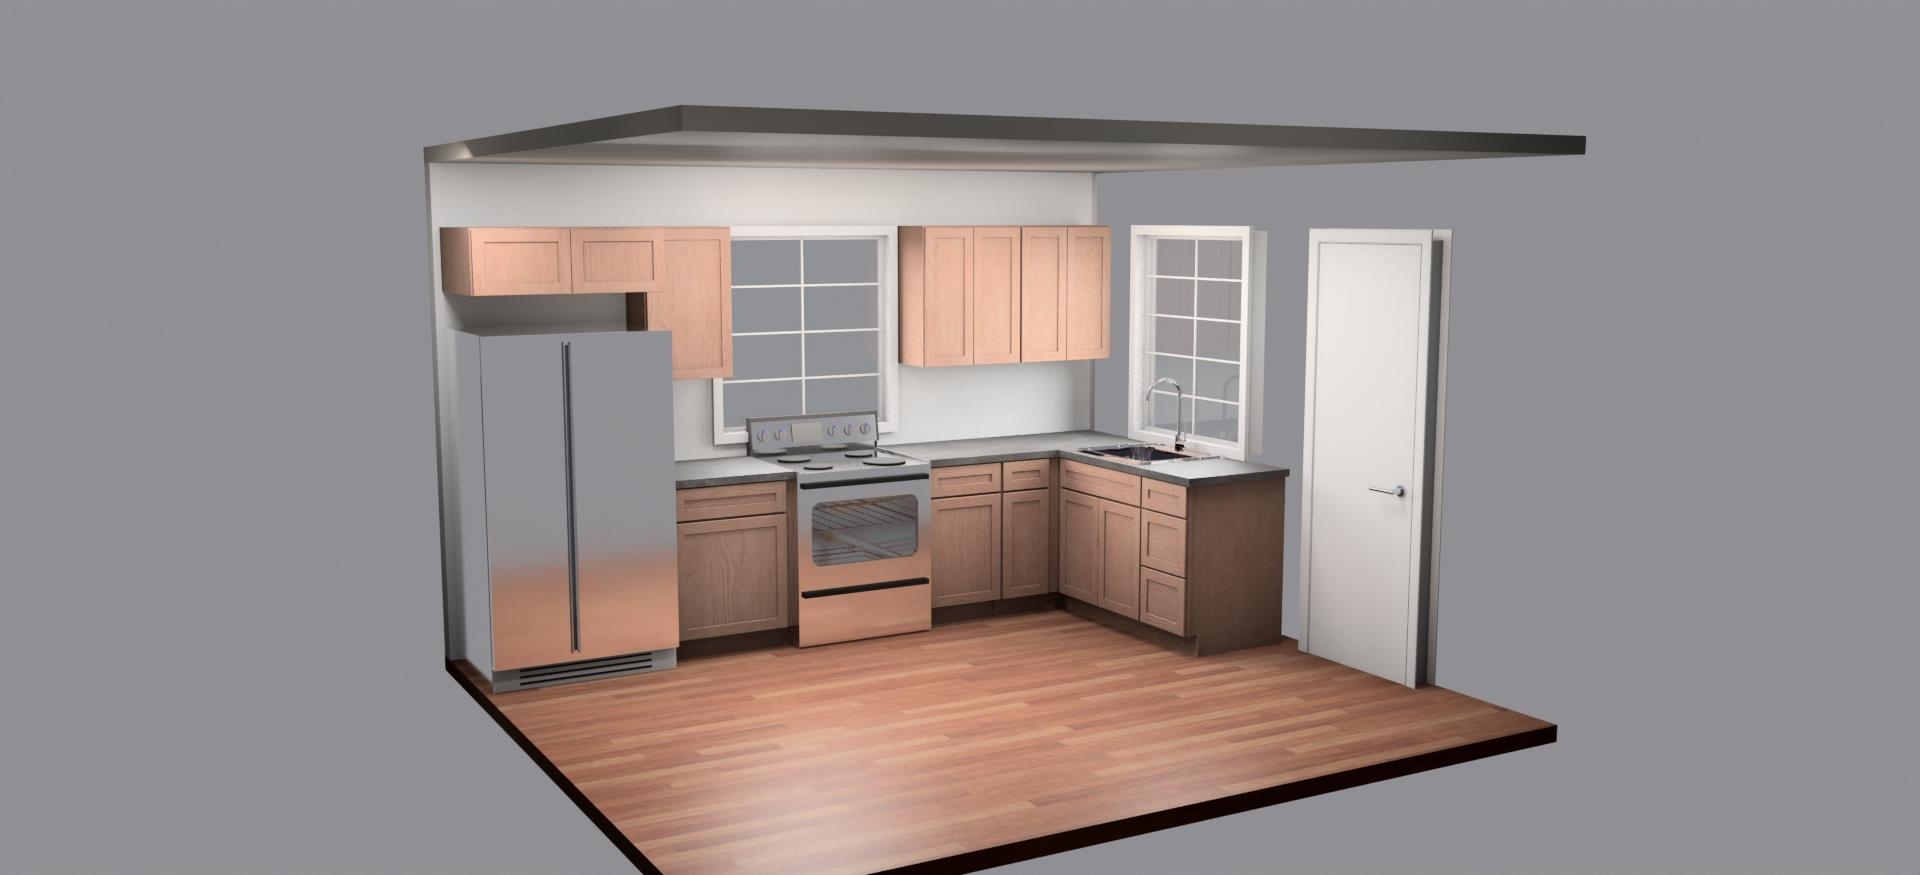 Image of New Kitchen Cabinets